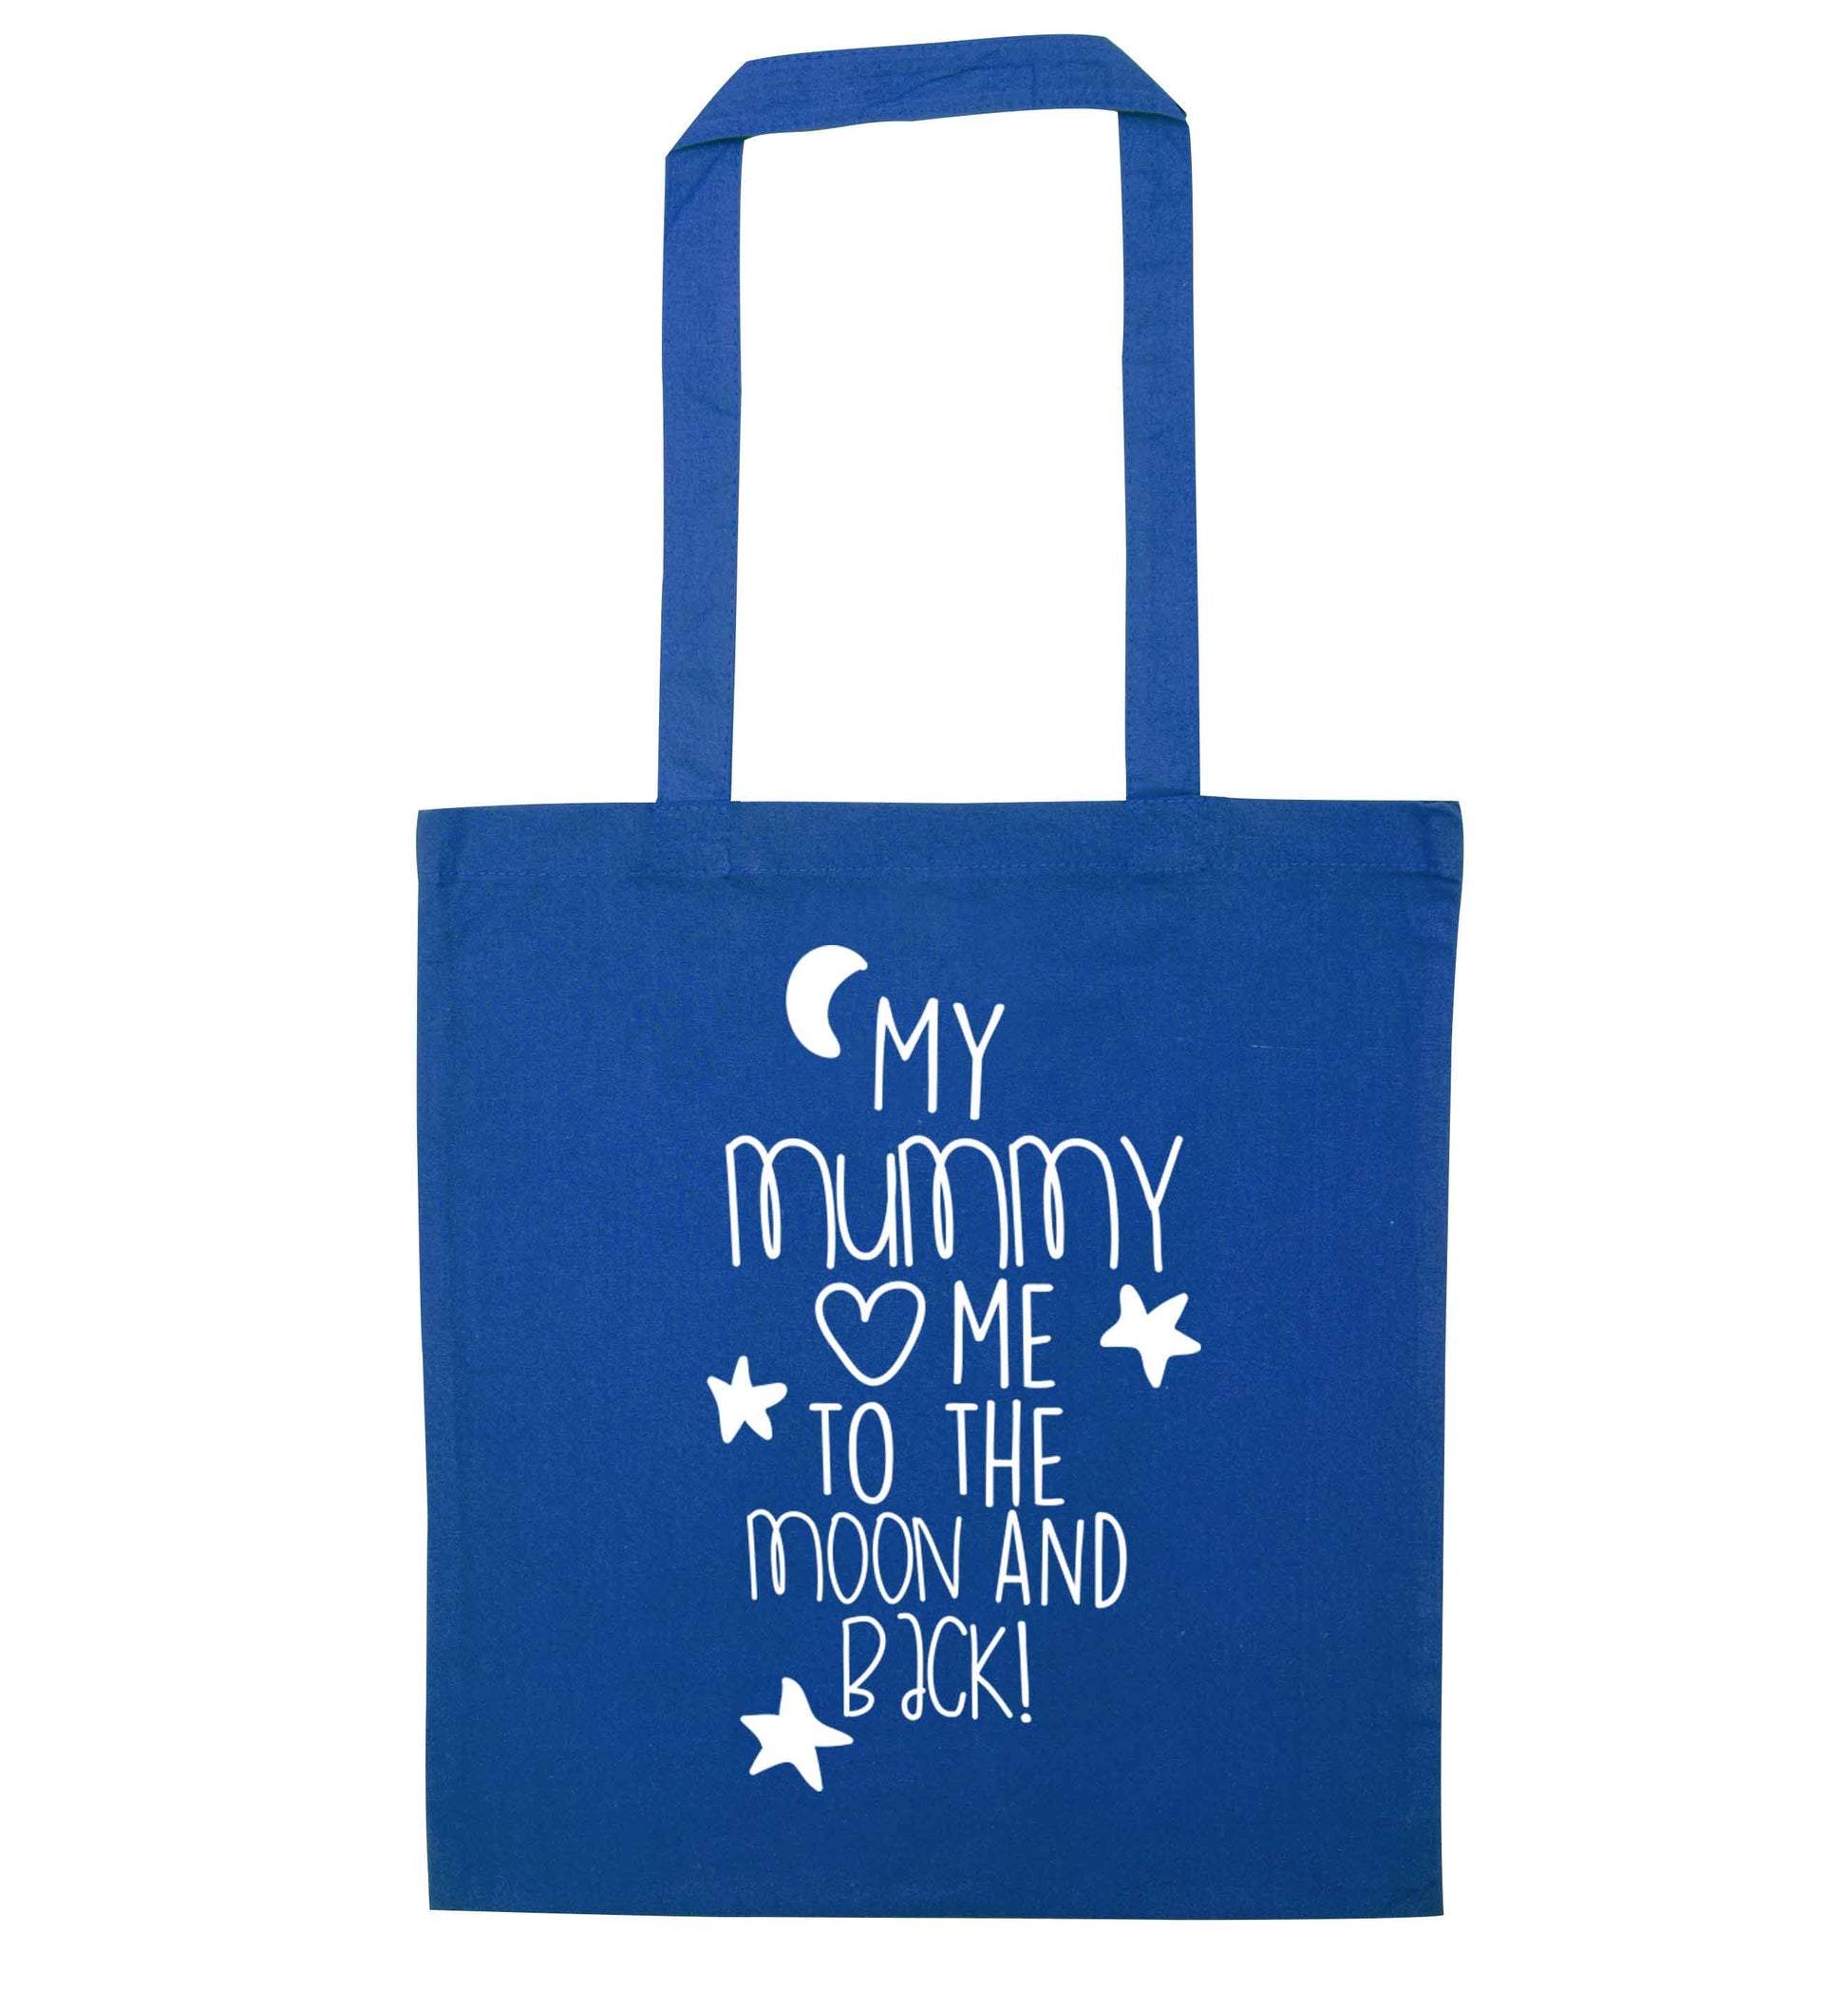 My mum loves me to the moon and back blue tote bag